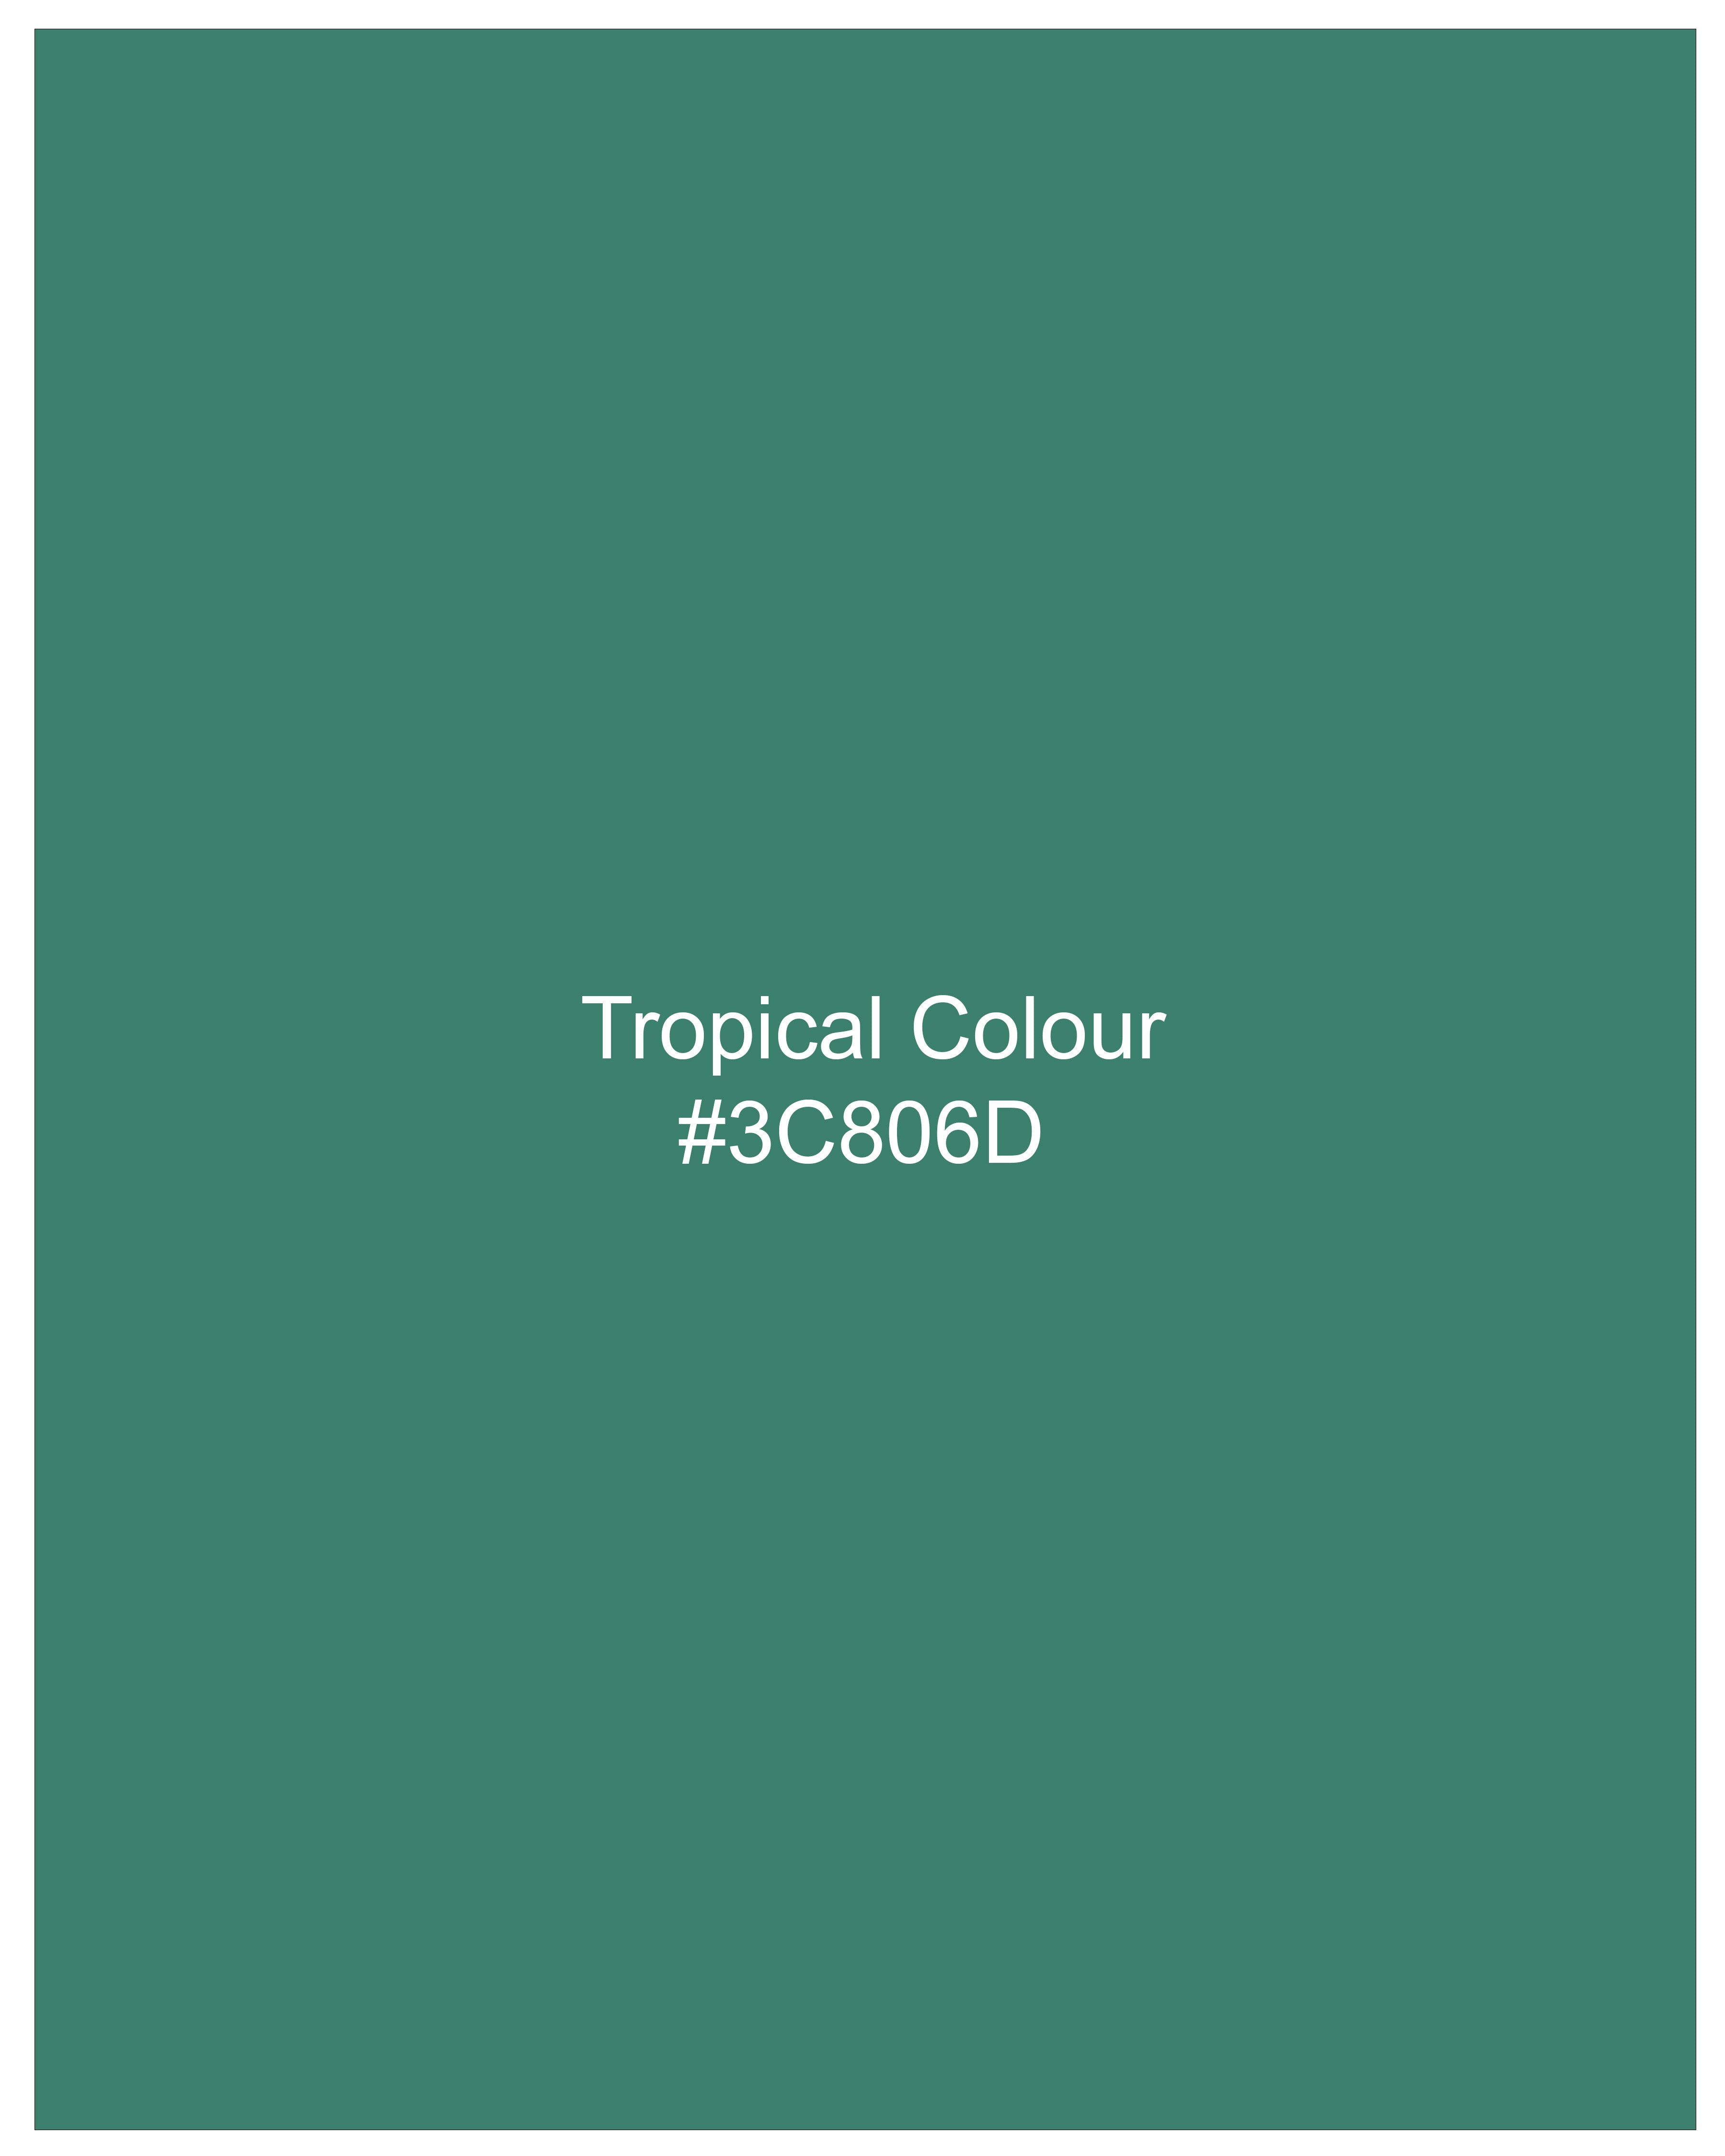 Tropical Green Hand Painted Premium Cotton T-shirt TS005-W011-S, TS005-W011-M, TS005-W011-L, TS005-W011-XL, TS005-W011-XXL